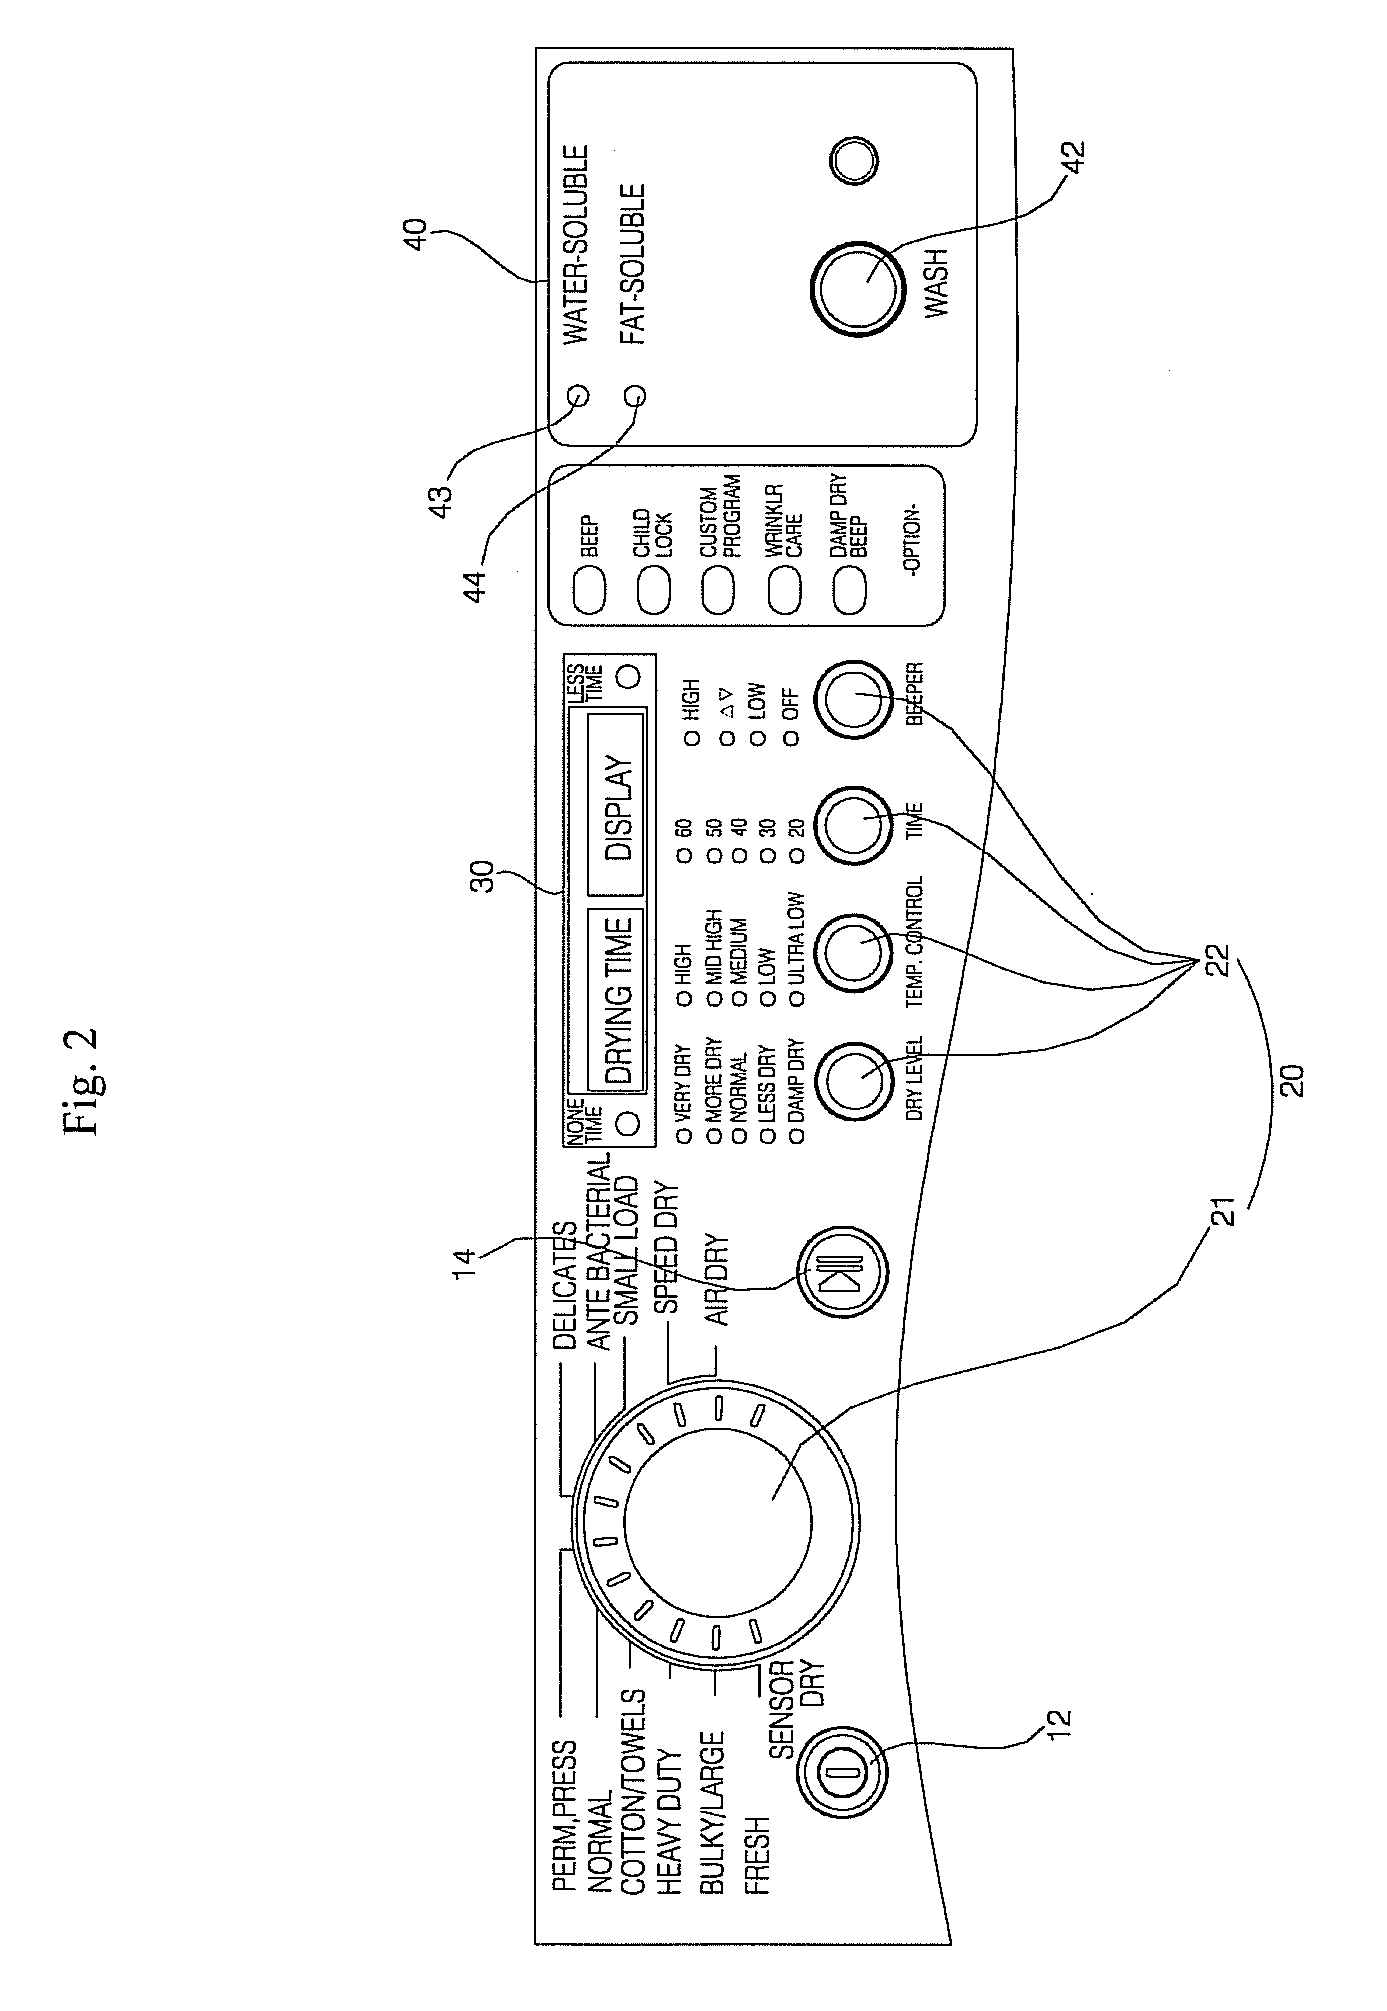 Fabric dryer and method of controlling the same